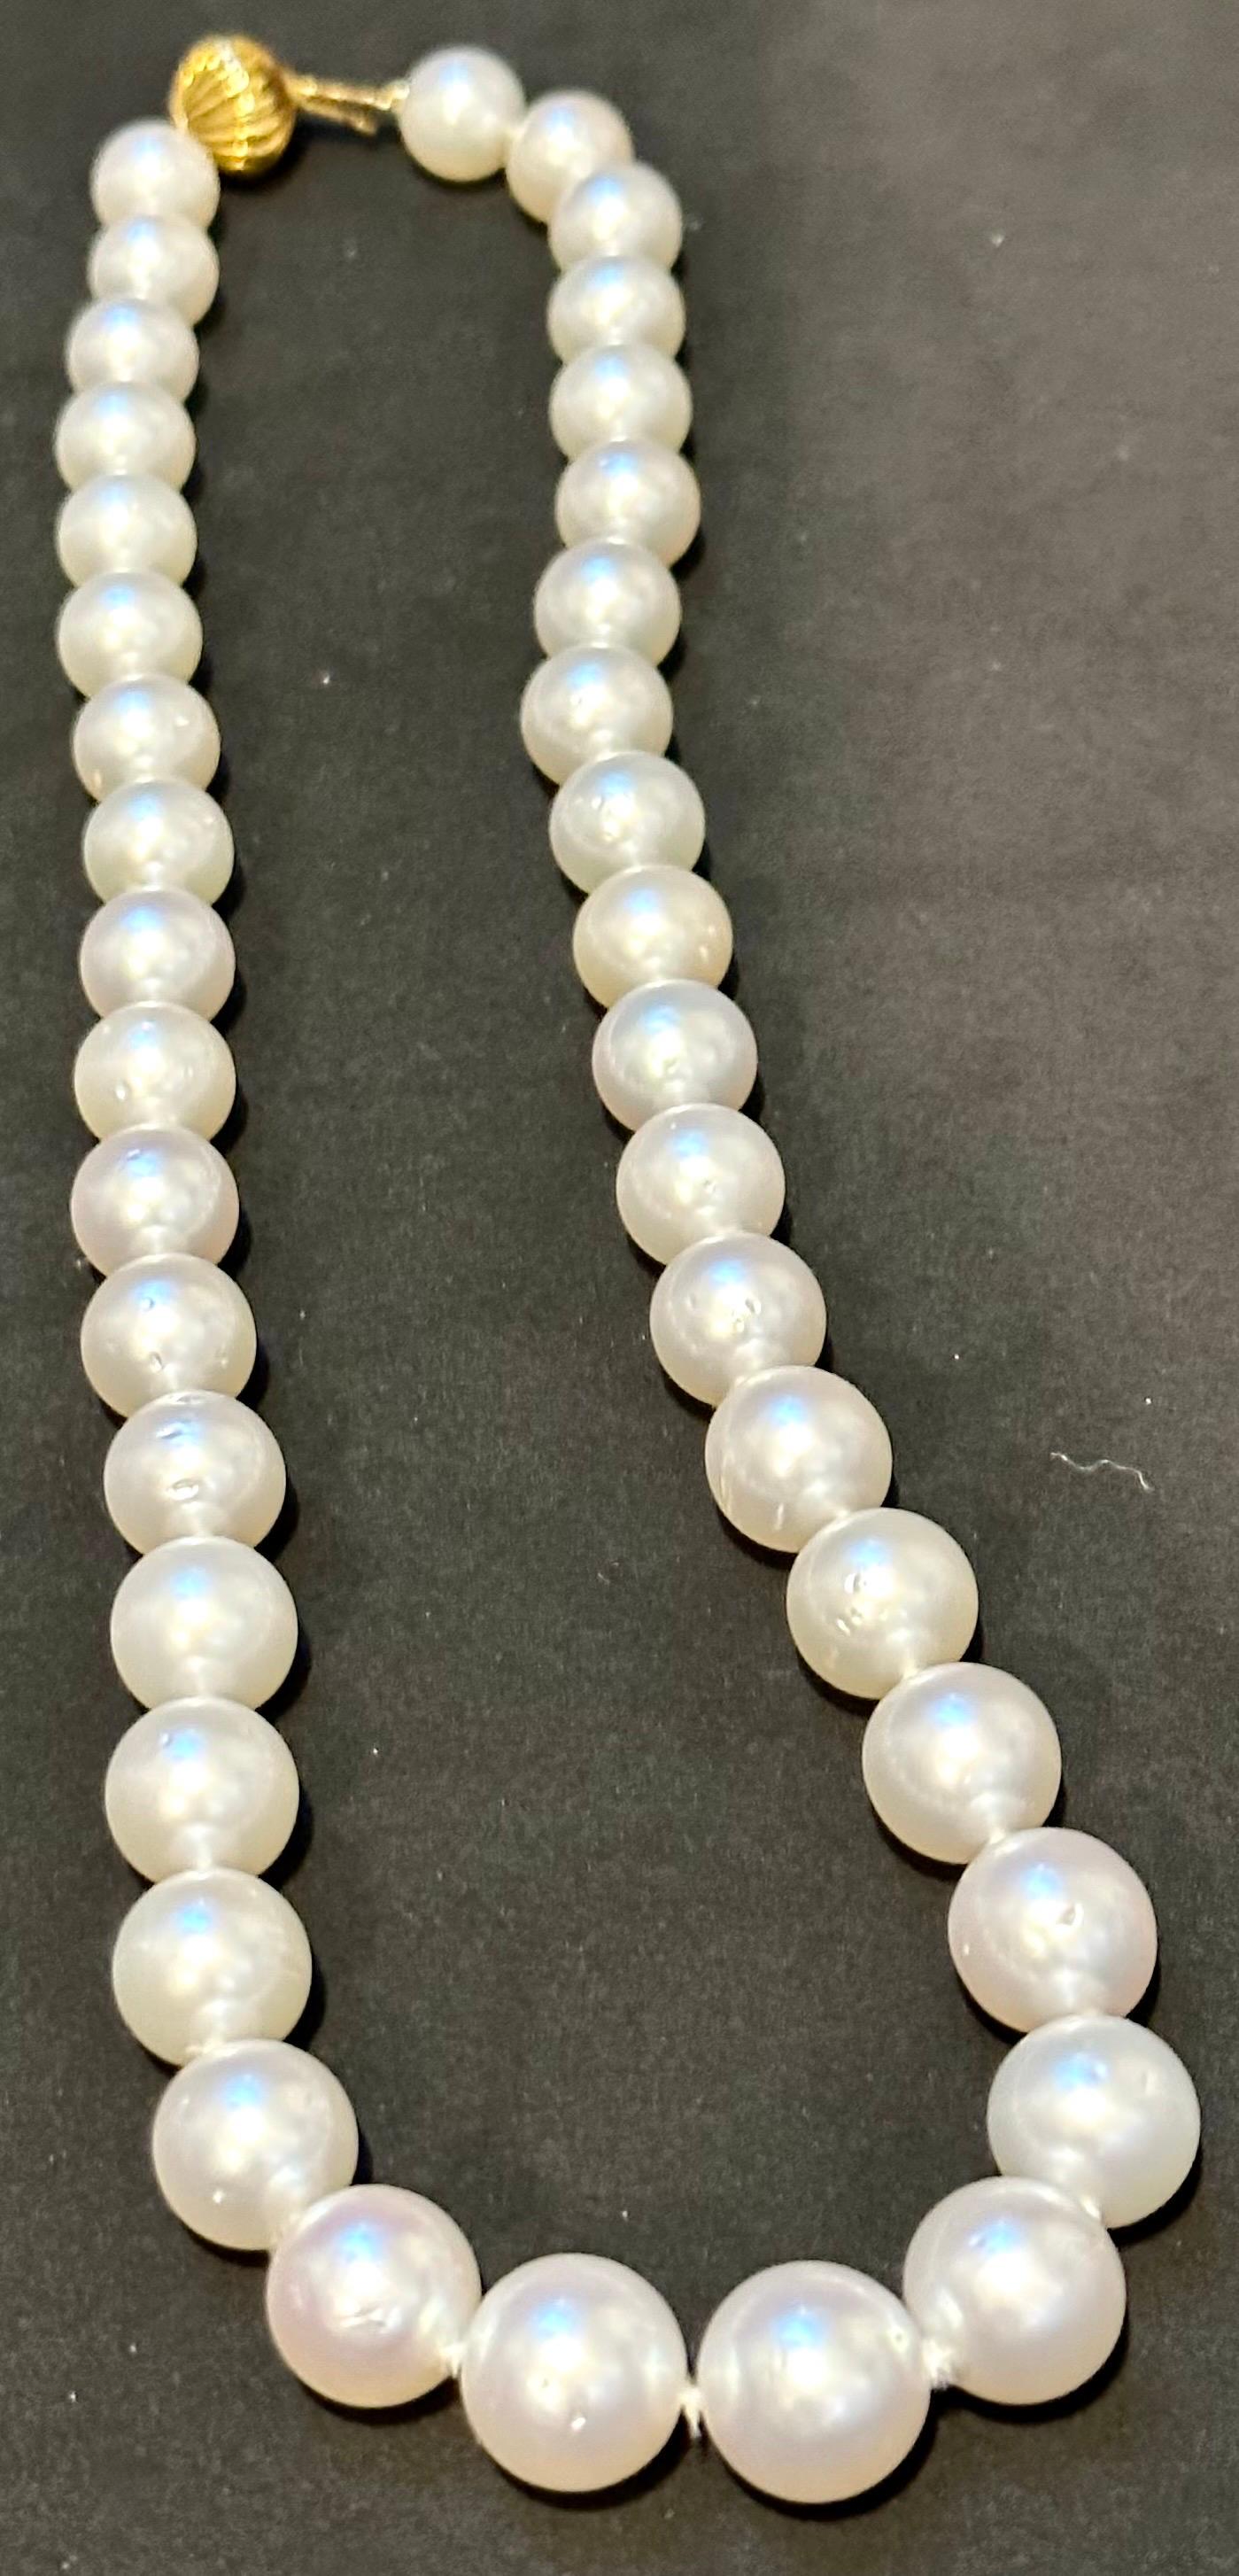 how do you clean pearls that have yellowed